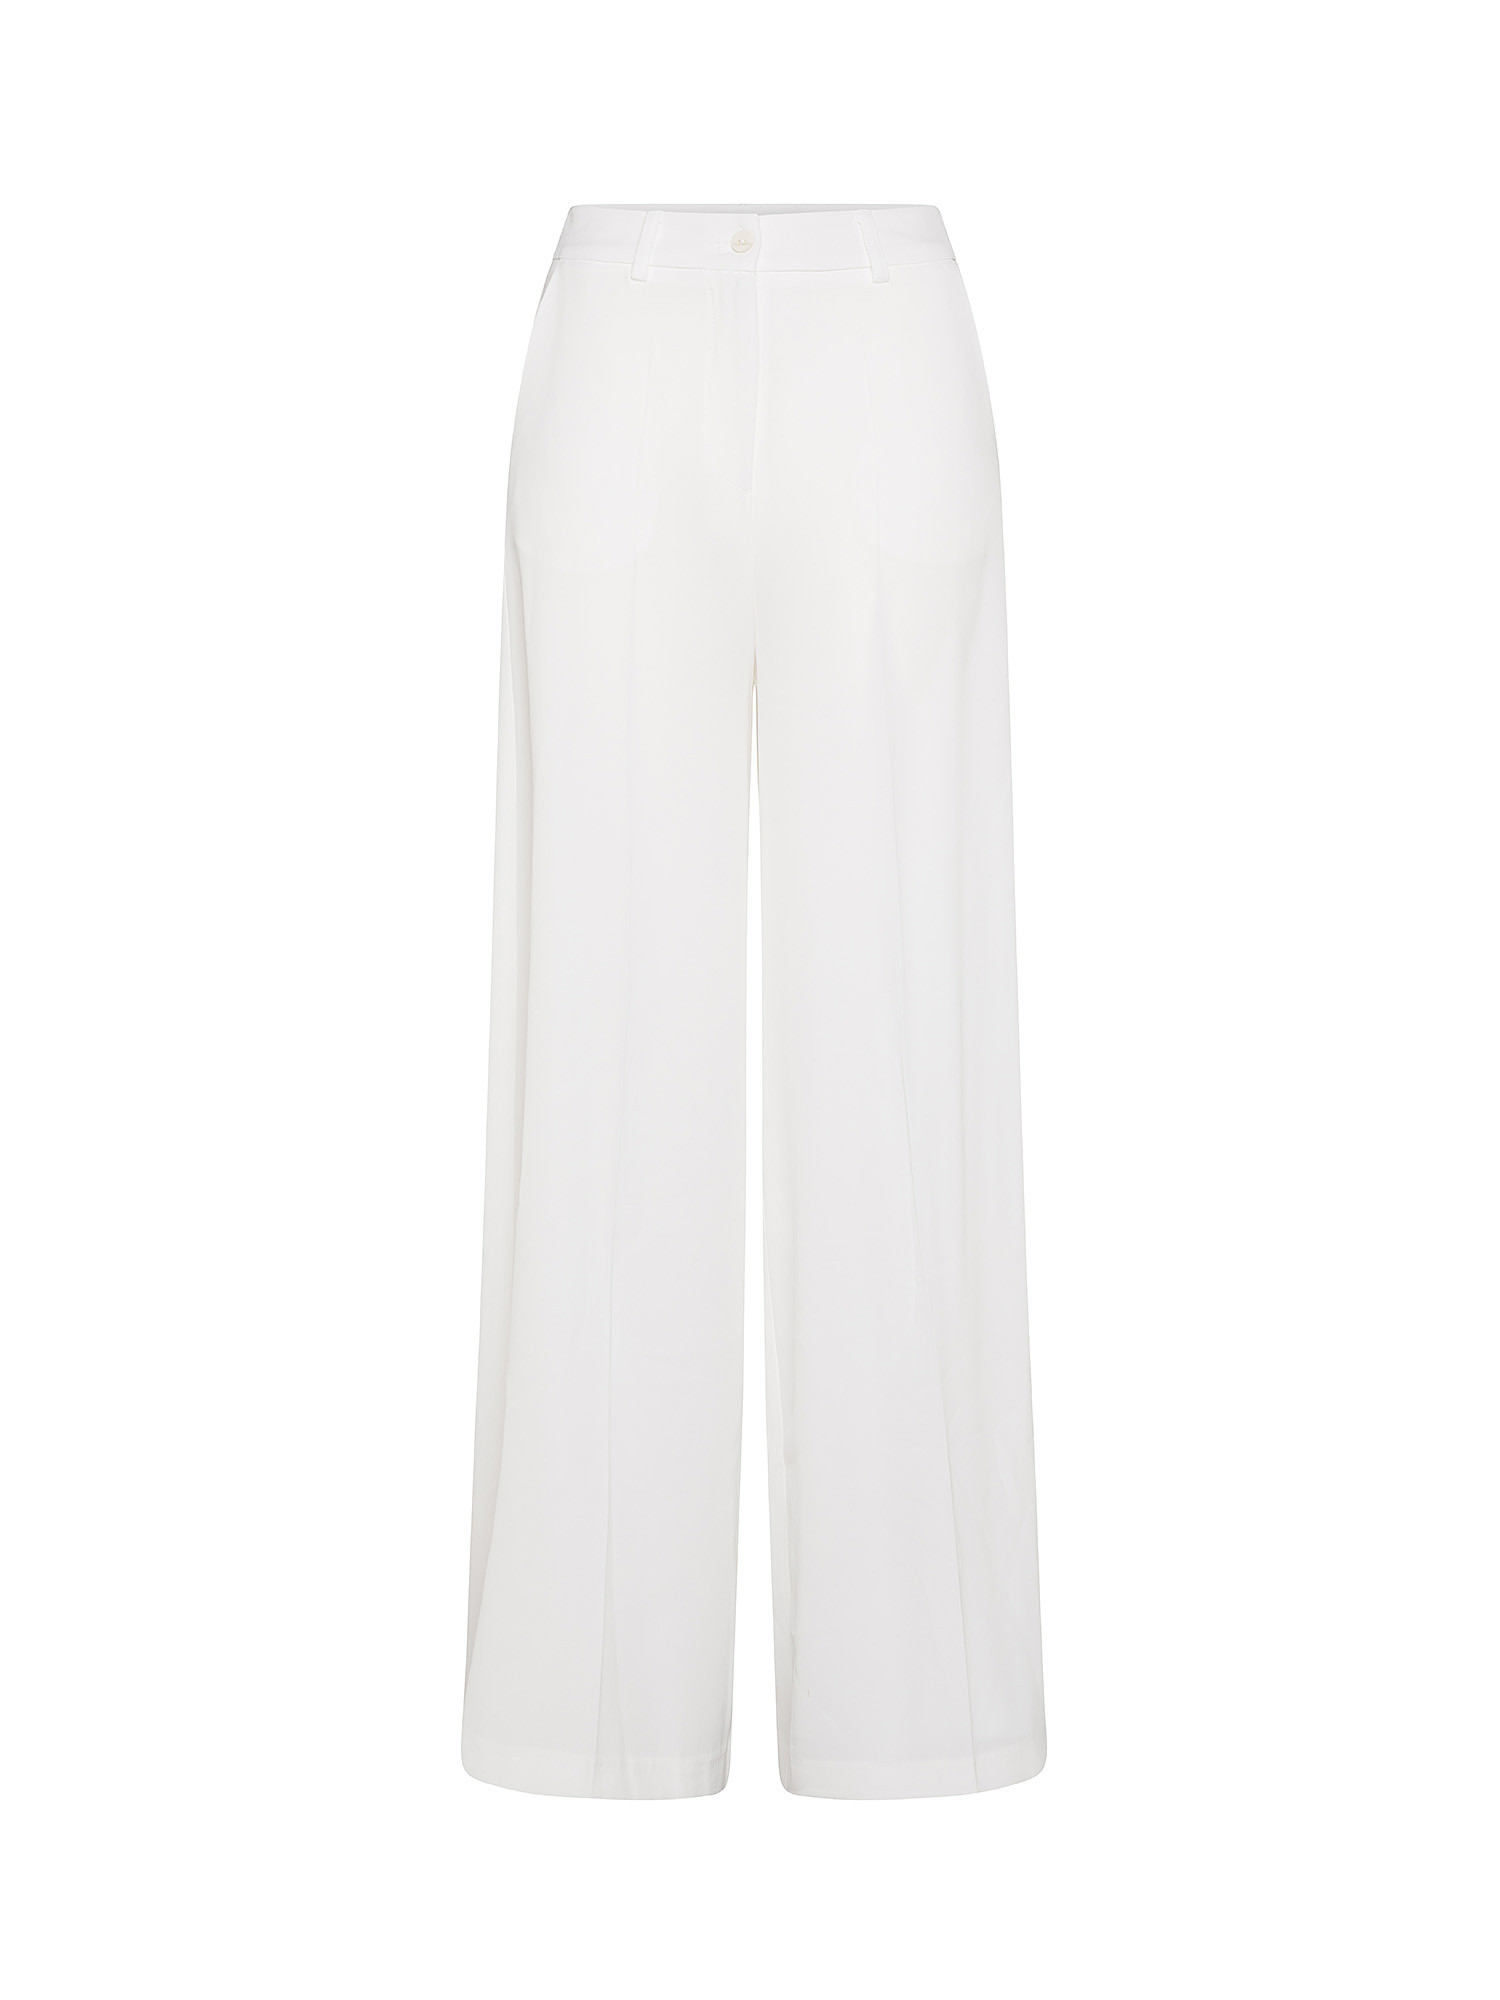 Cady trousers, White, large image number 0